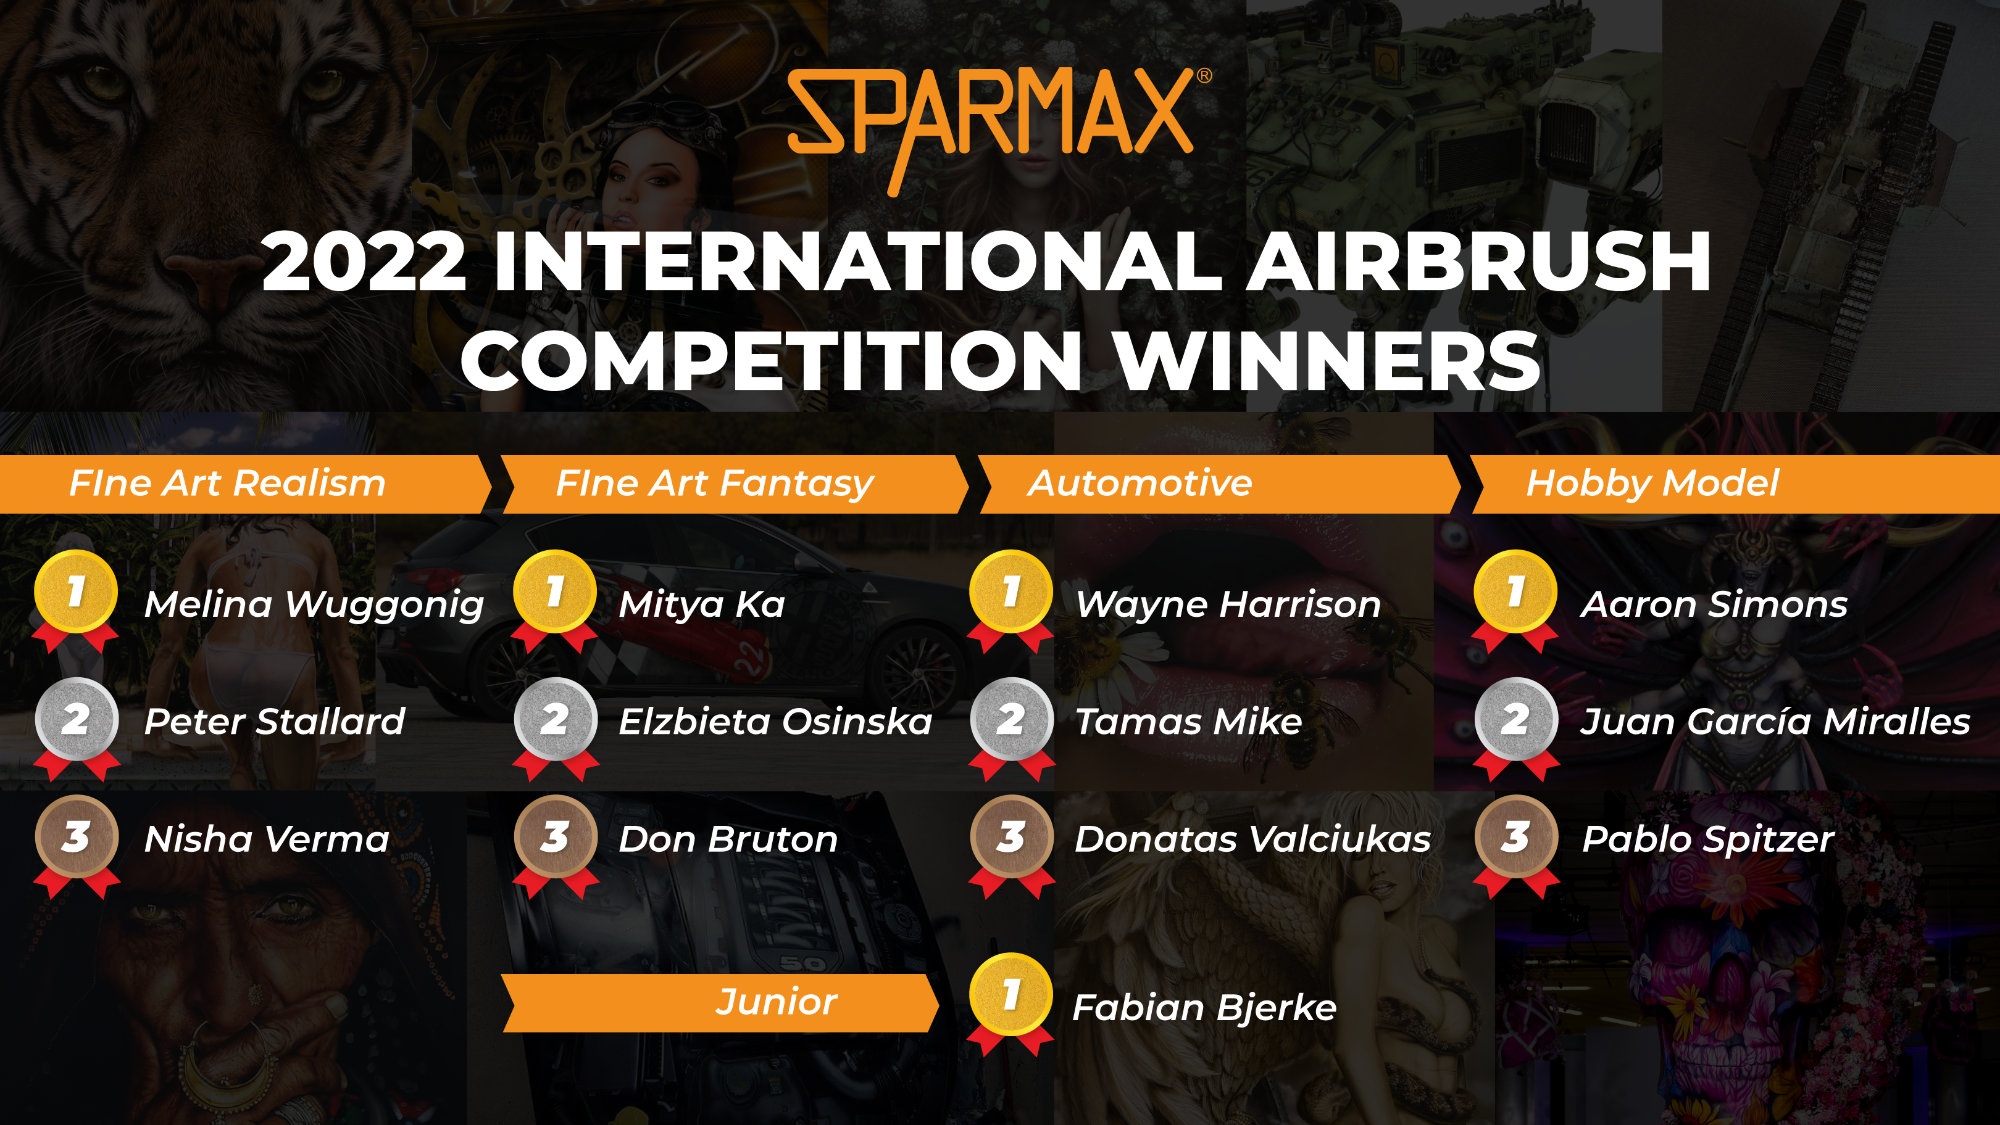 Sparmax International Airbrush Contest 2022: The winners